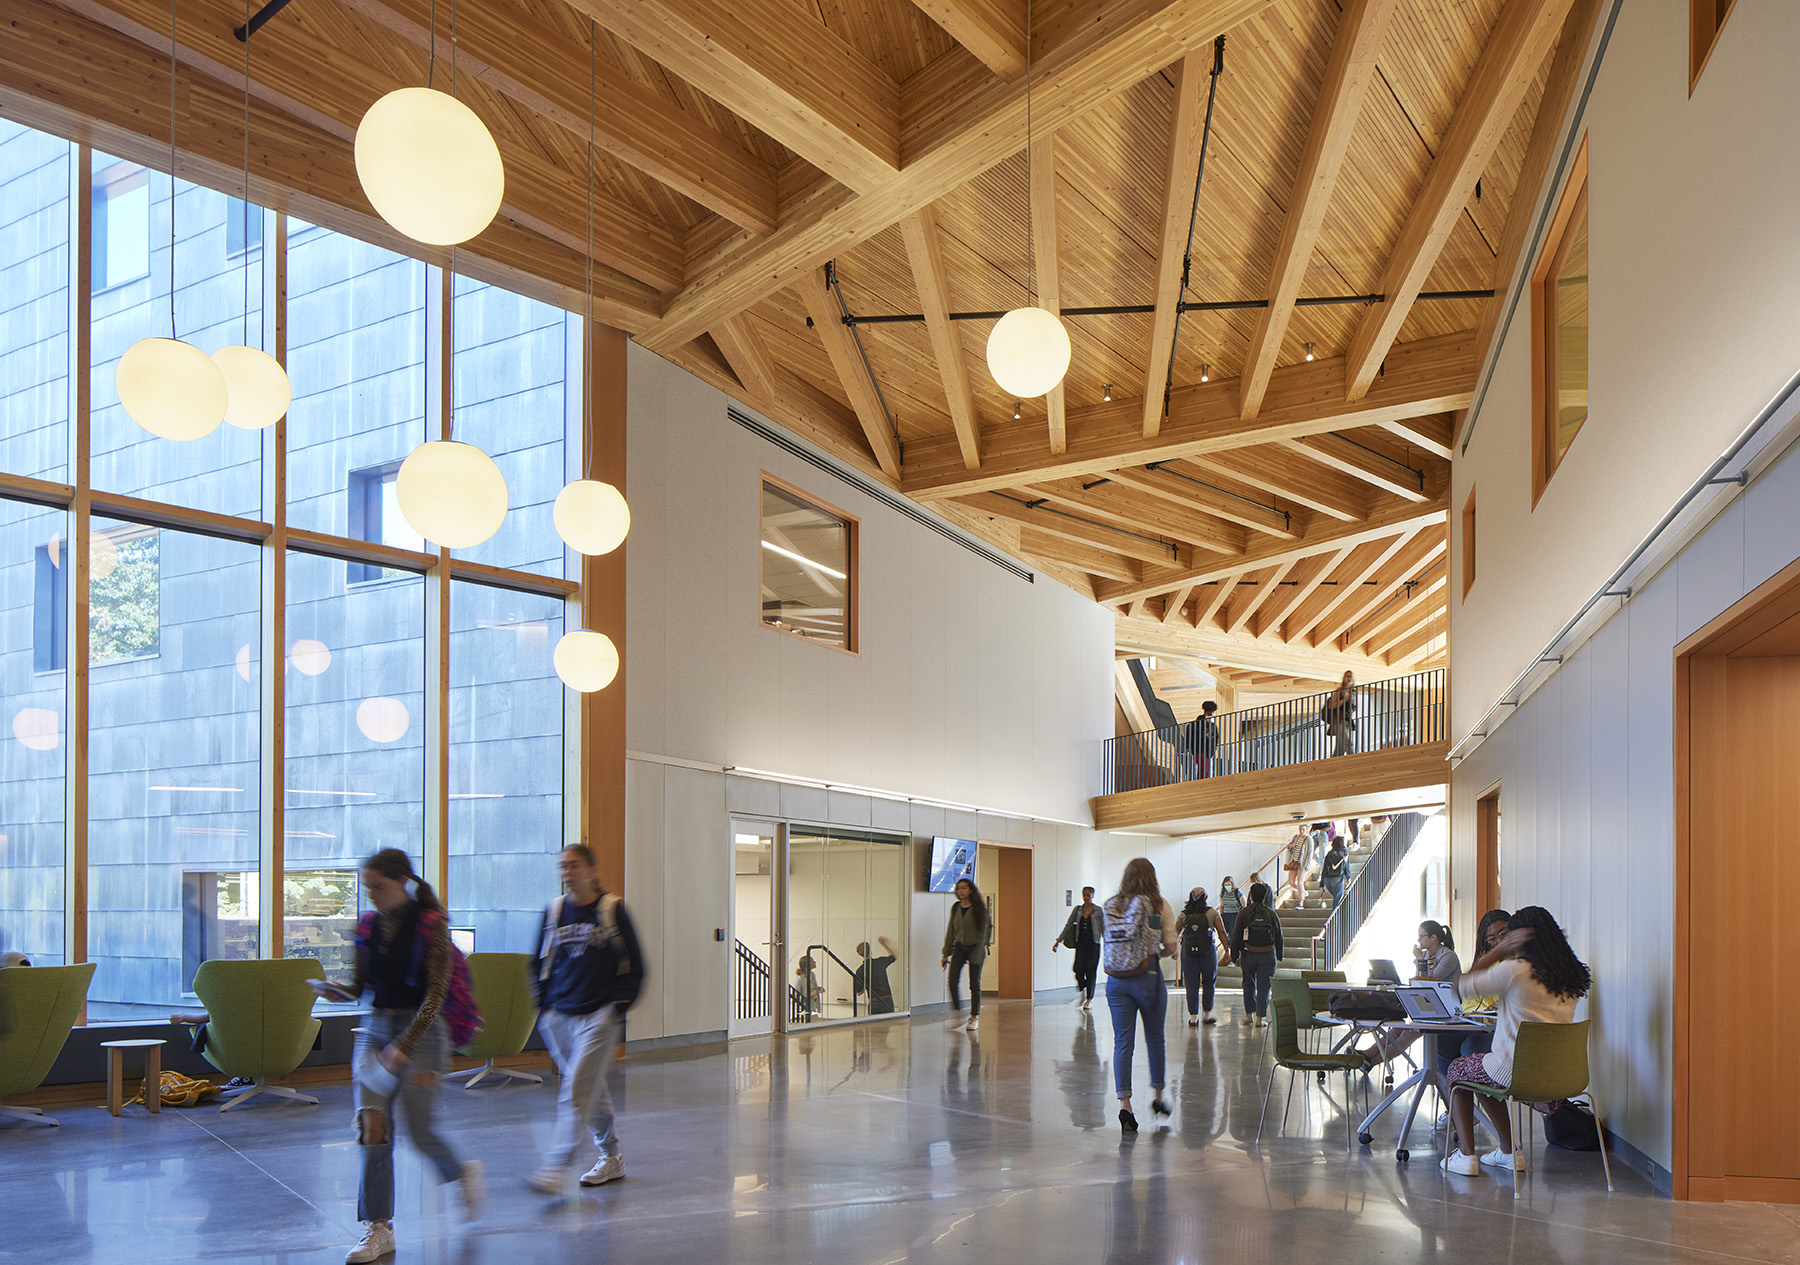 Students walk through a large multistory space. The ceiling is made of a light wood and the floor is concrete.